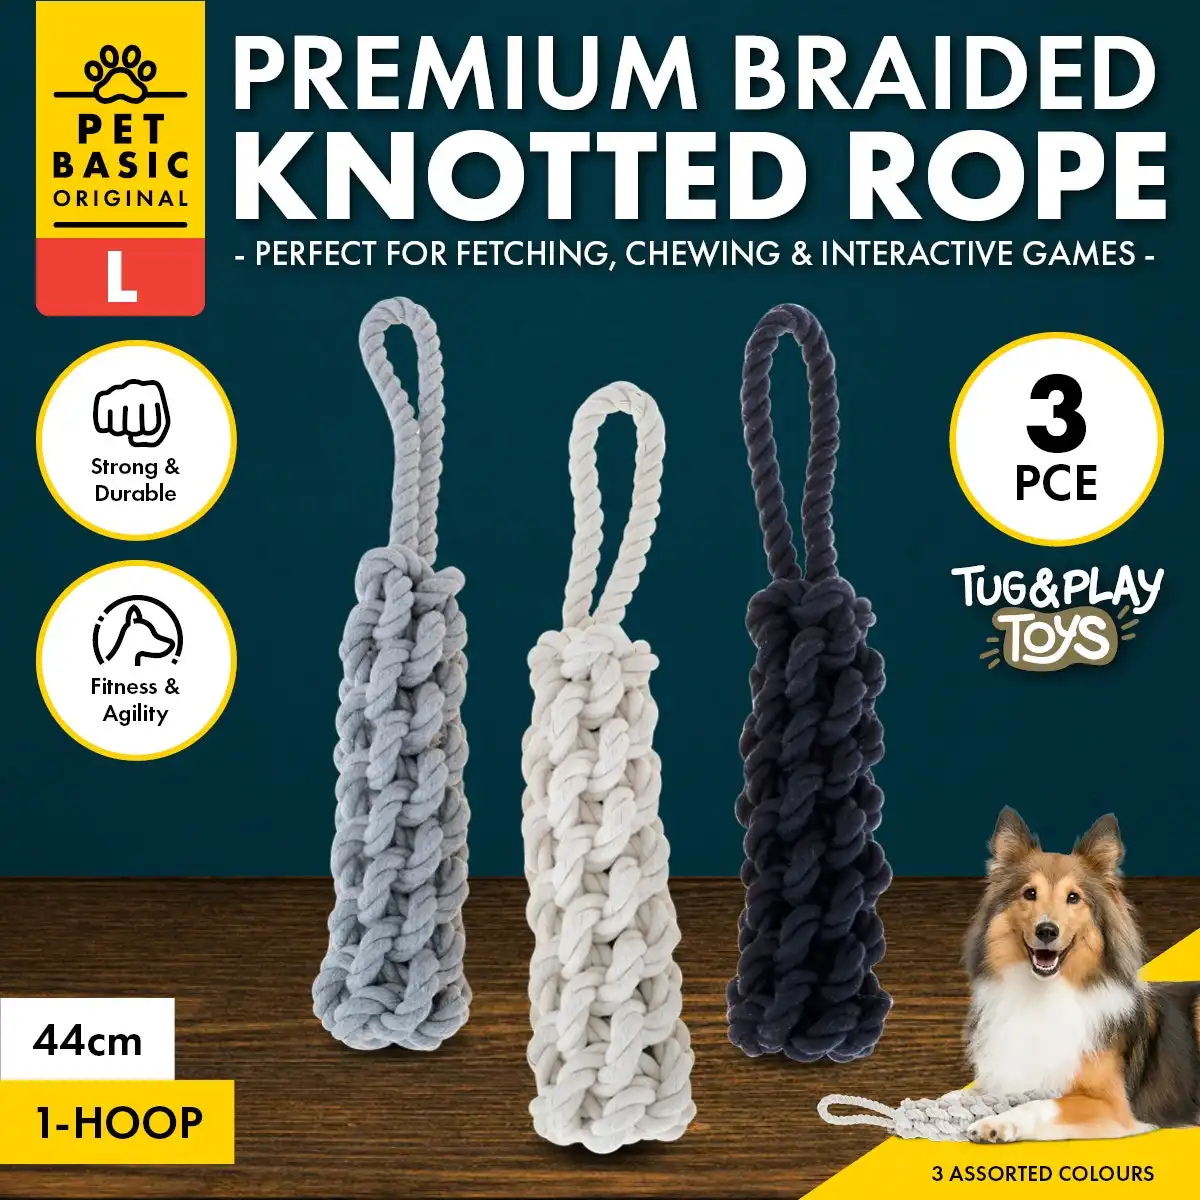 Pet Basic® 3PCE Premium Braided Knotted Rope Large Natural Fibres 44cm